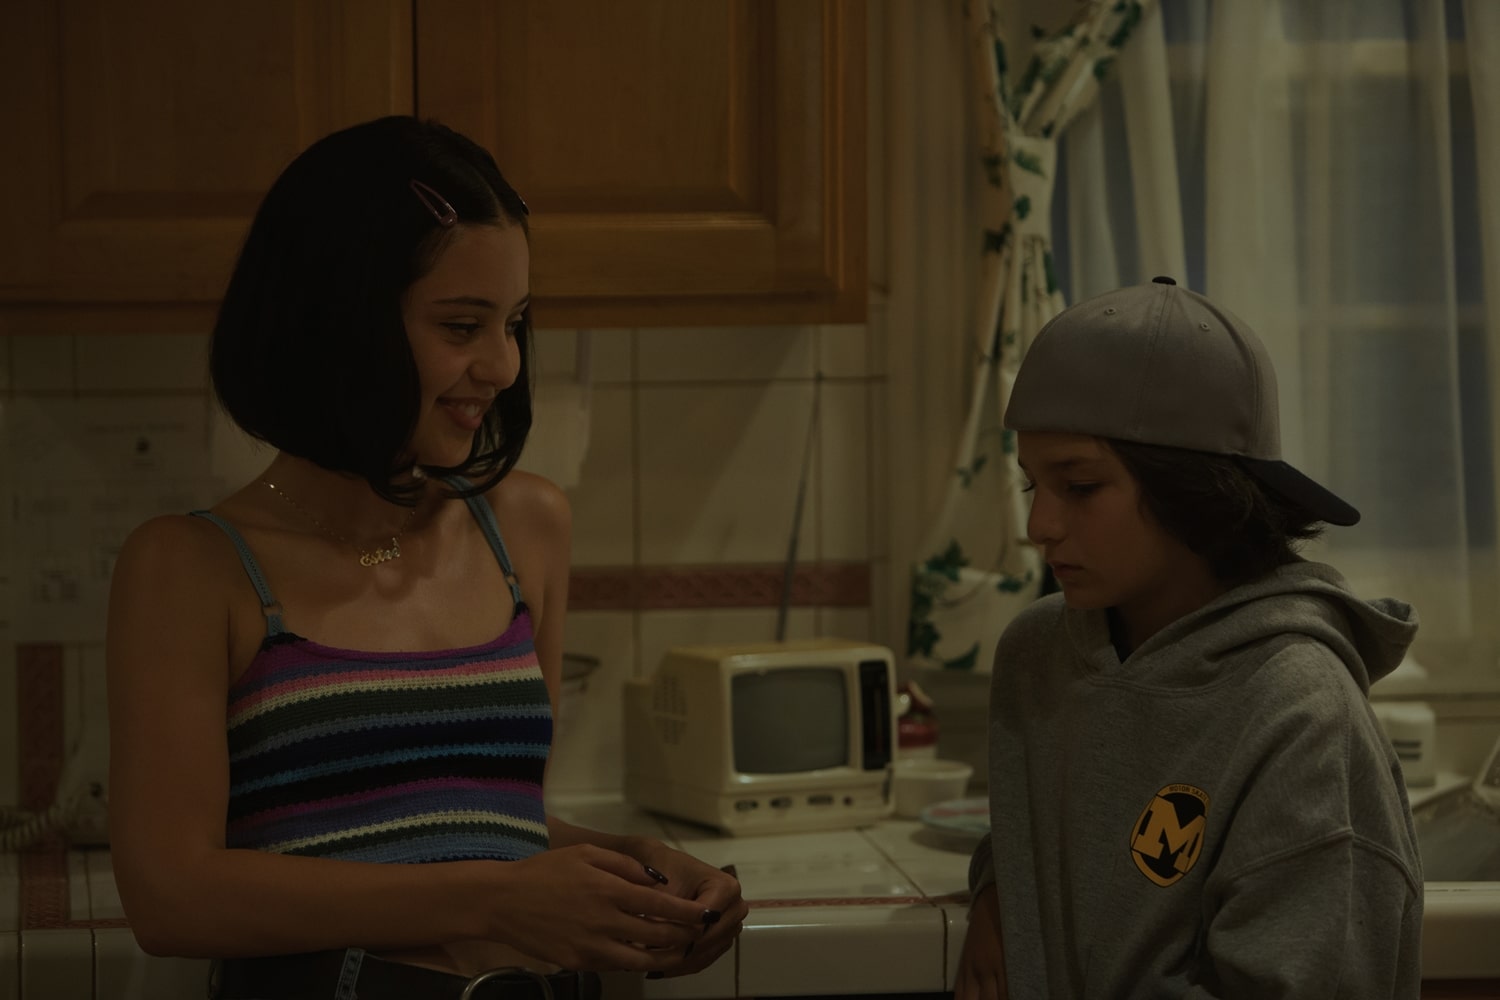 Alexa Demie as Estee and Sunny Suljic as Stevie "Sunburn" in the 2018 American coming-of-age comedy-drama film Mid90s